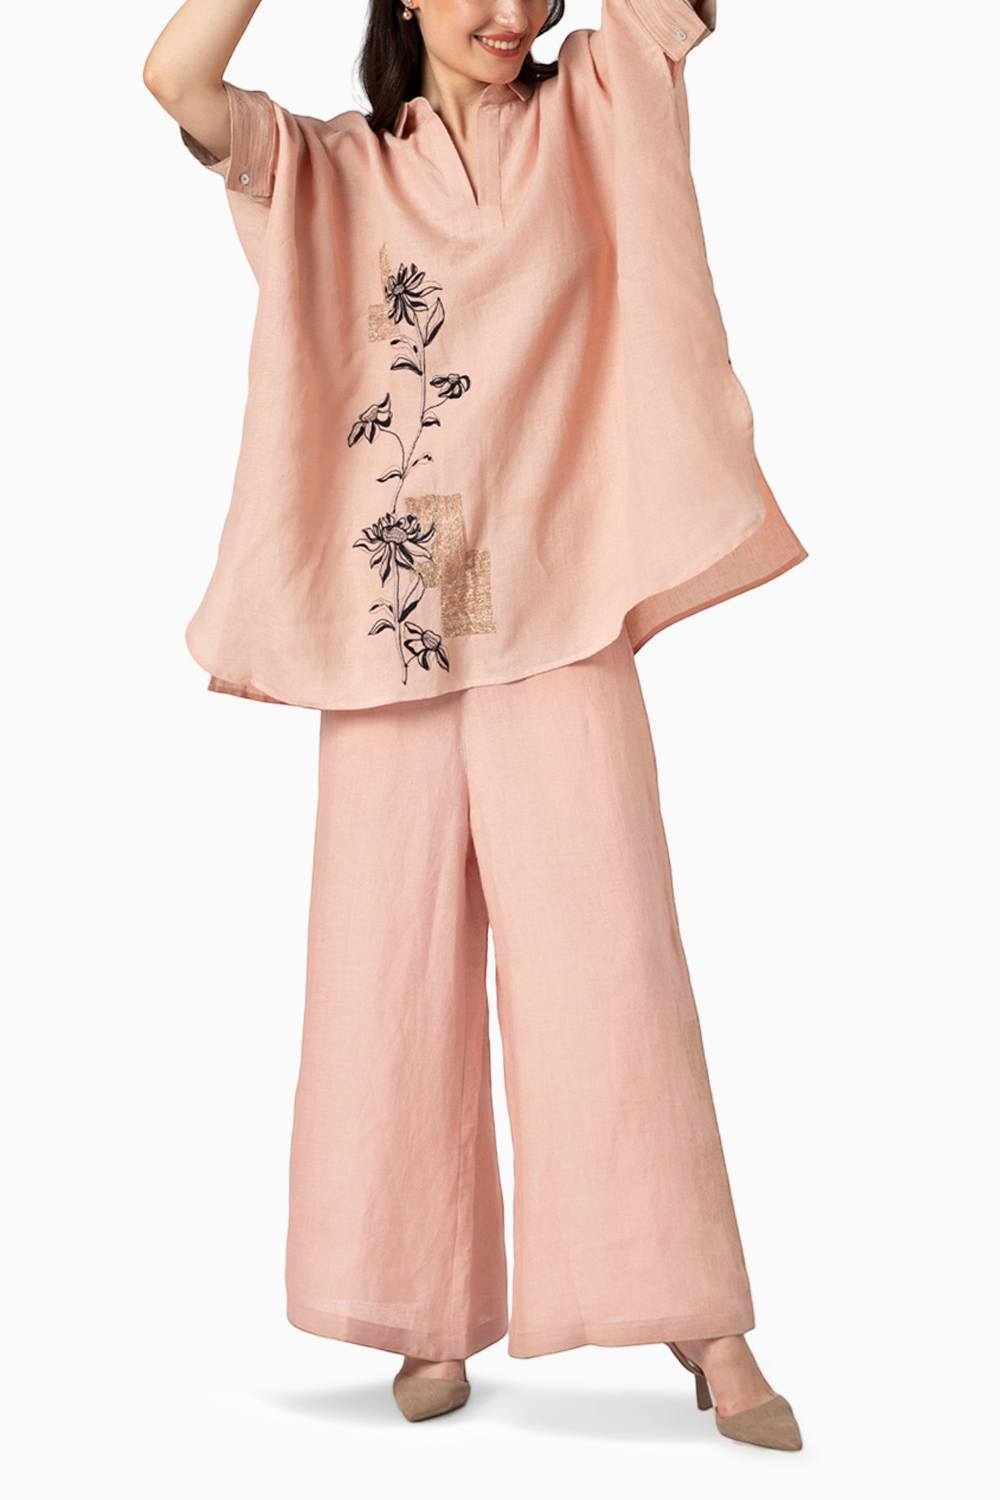 Beaten Metal Square Dusty Rose Top and Pant